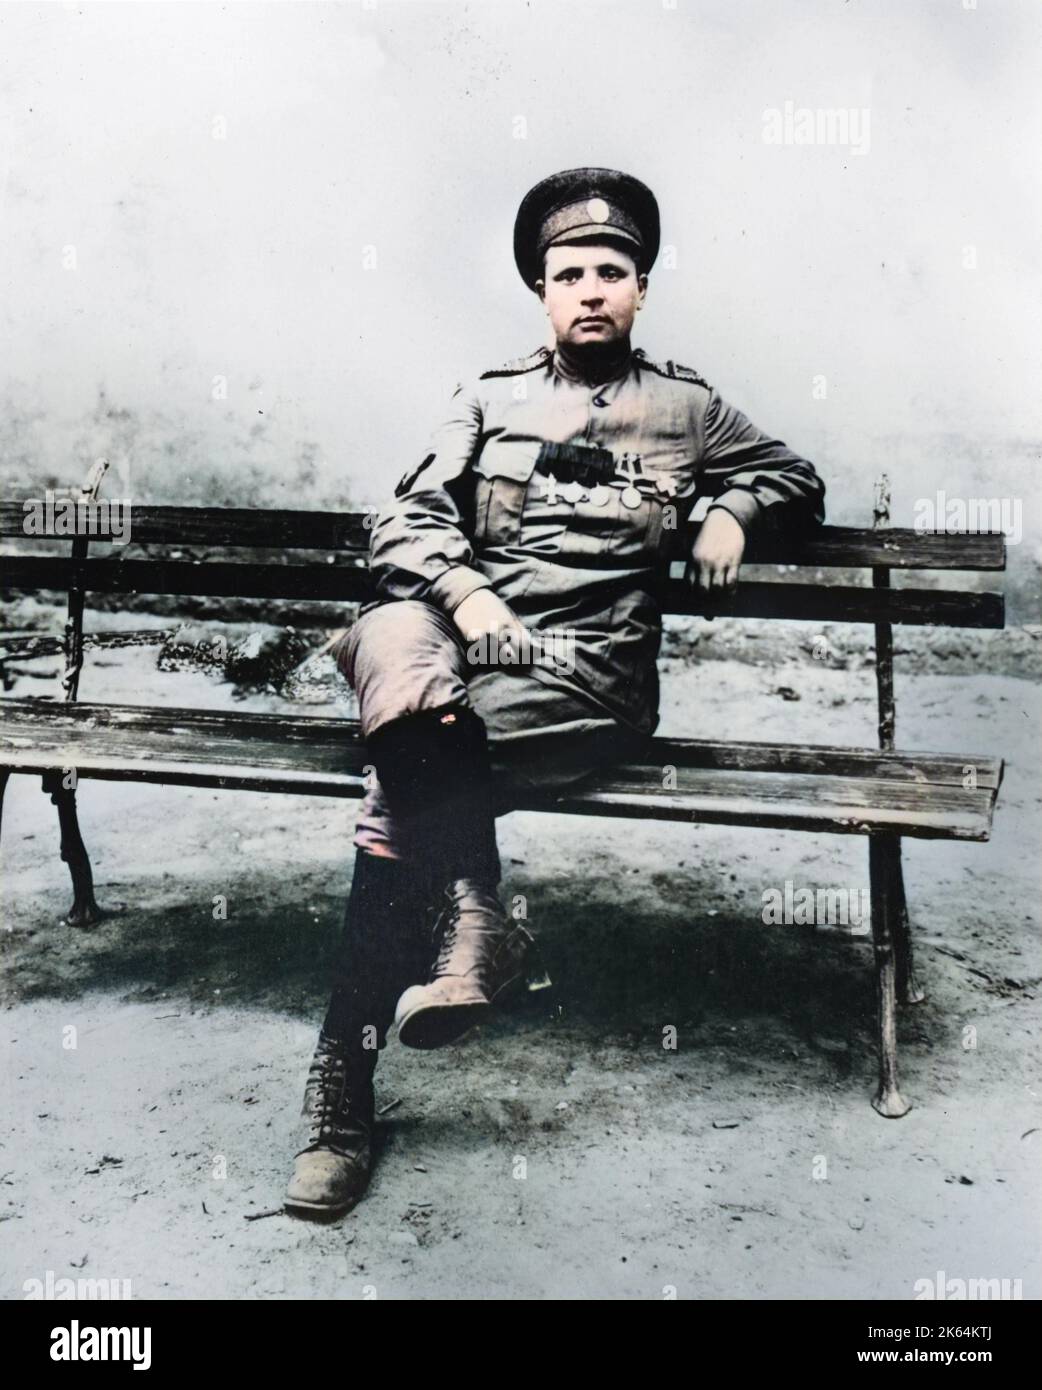 Maria Leontievna Bochkareva (nee Frolkova),  who fought in World War I and formed the First Russian Women's Battalion of Death in 1917.  Seen here in uniform in 1917, with her medals on display, sitting relaxed on a bench with her legs crossed. Stock Photo